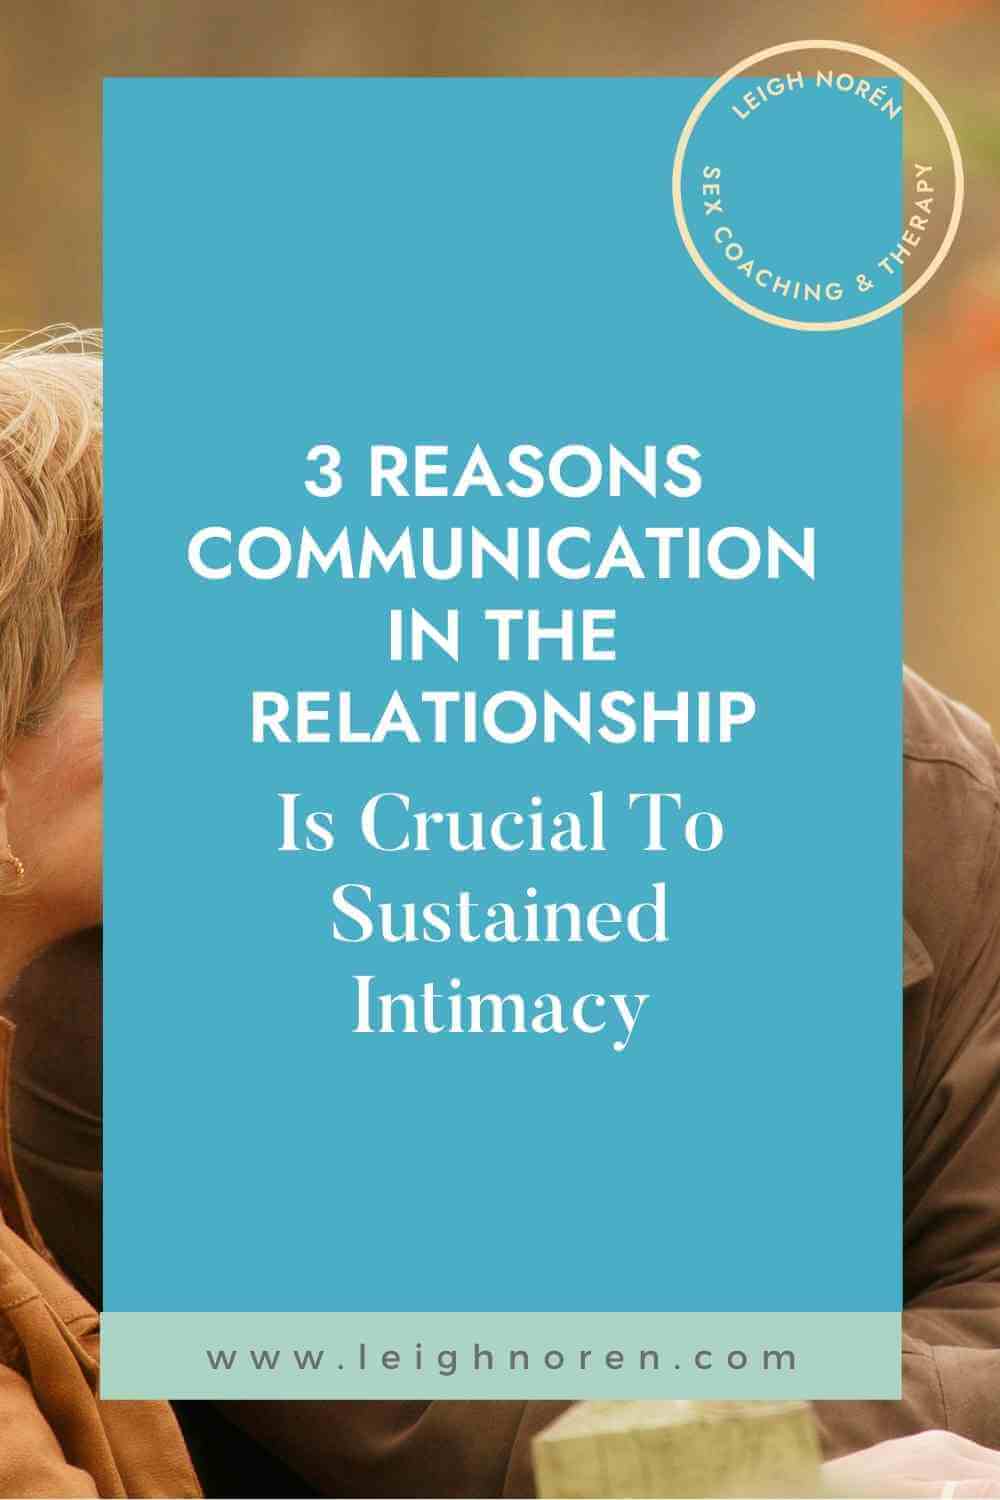 3 Reasons Communication In The Relationship Is Crucial To Sustained Intimacy